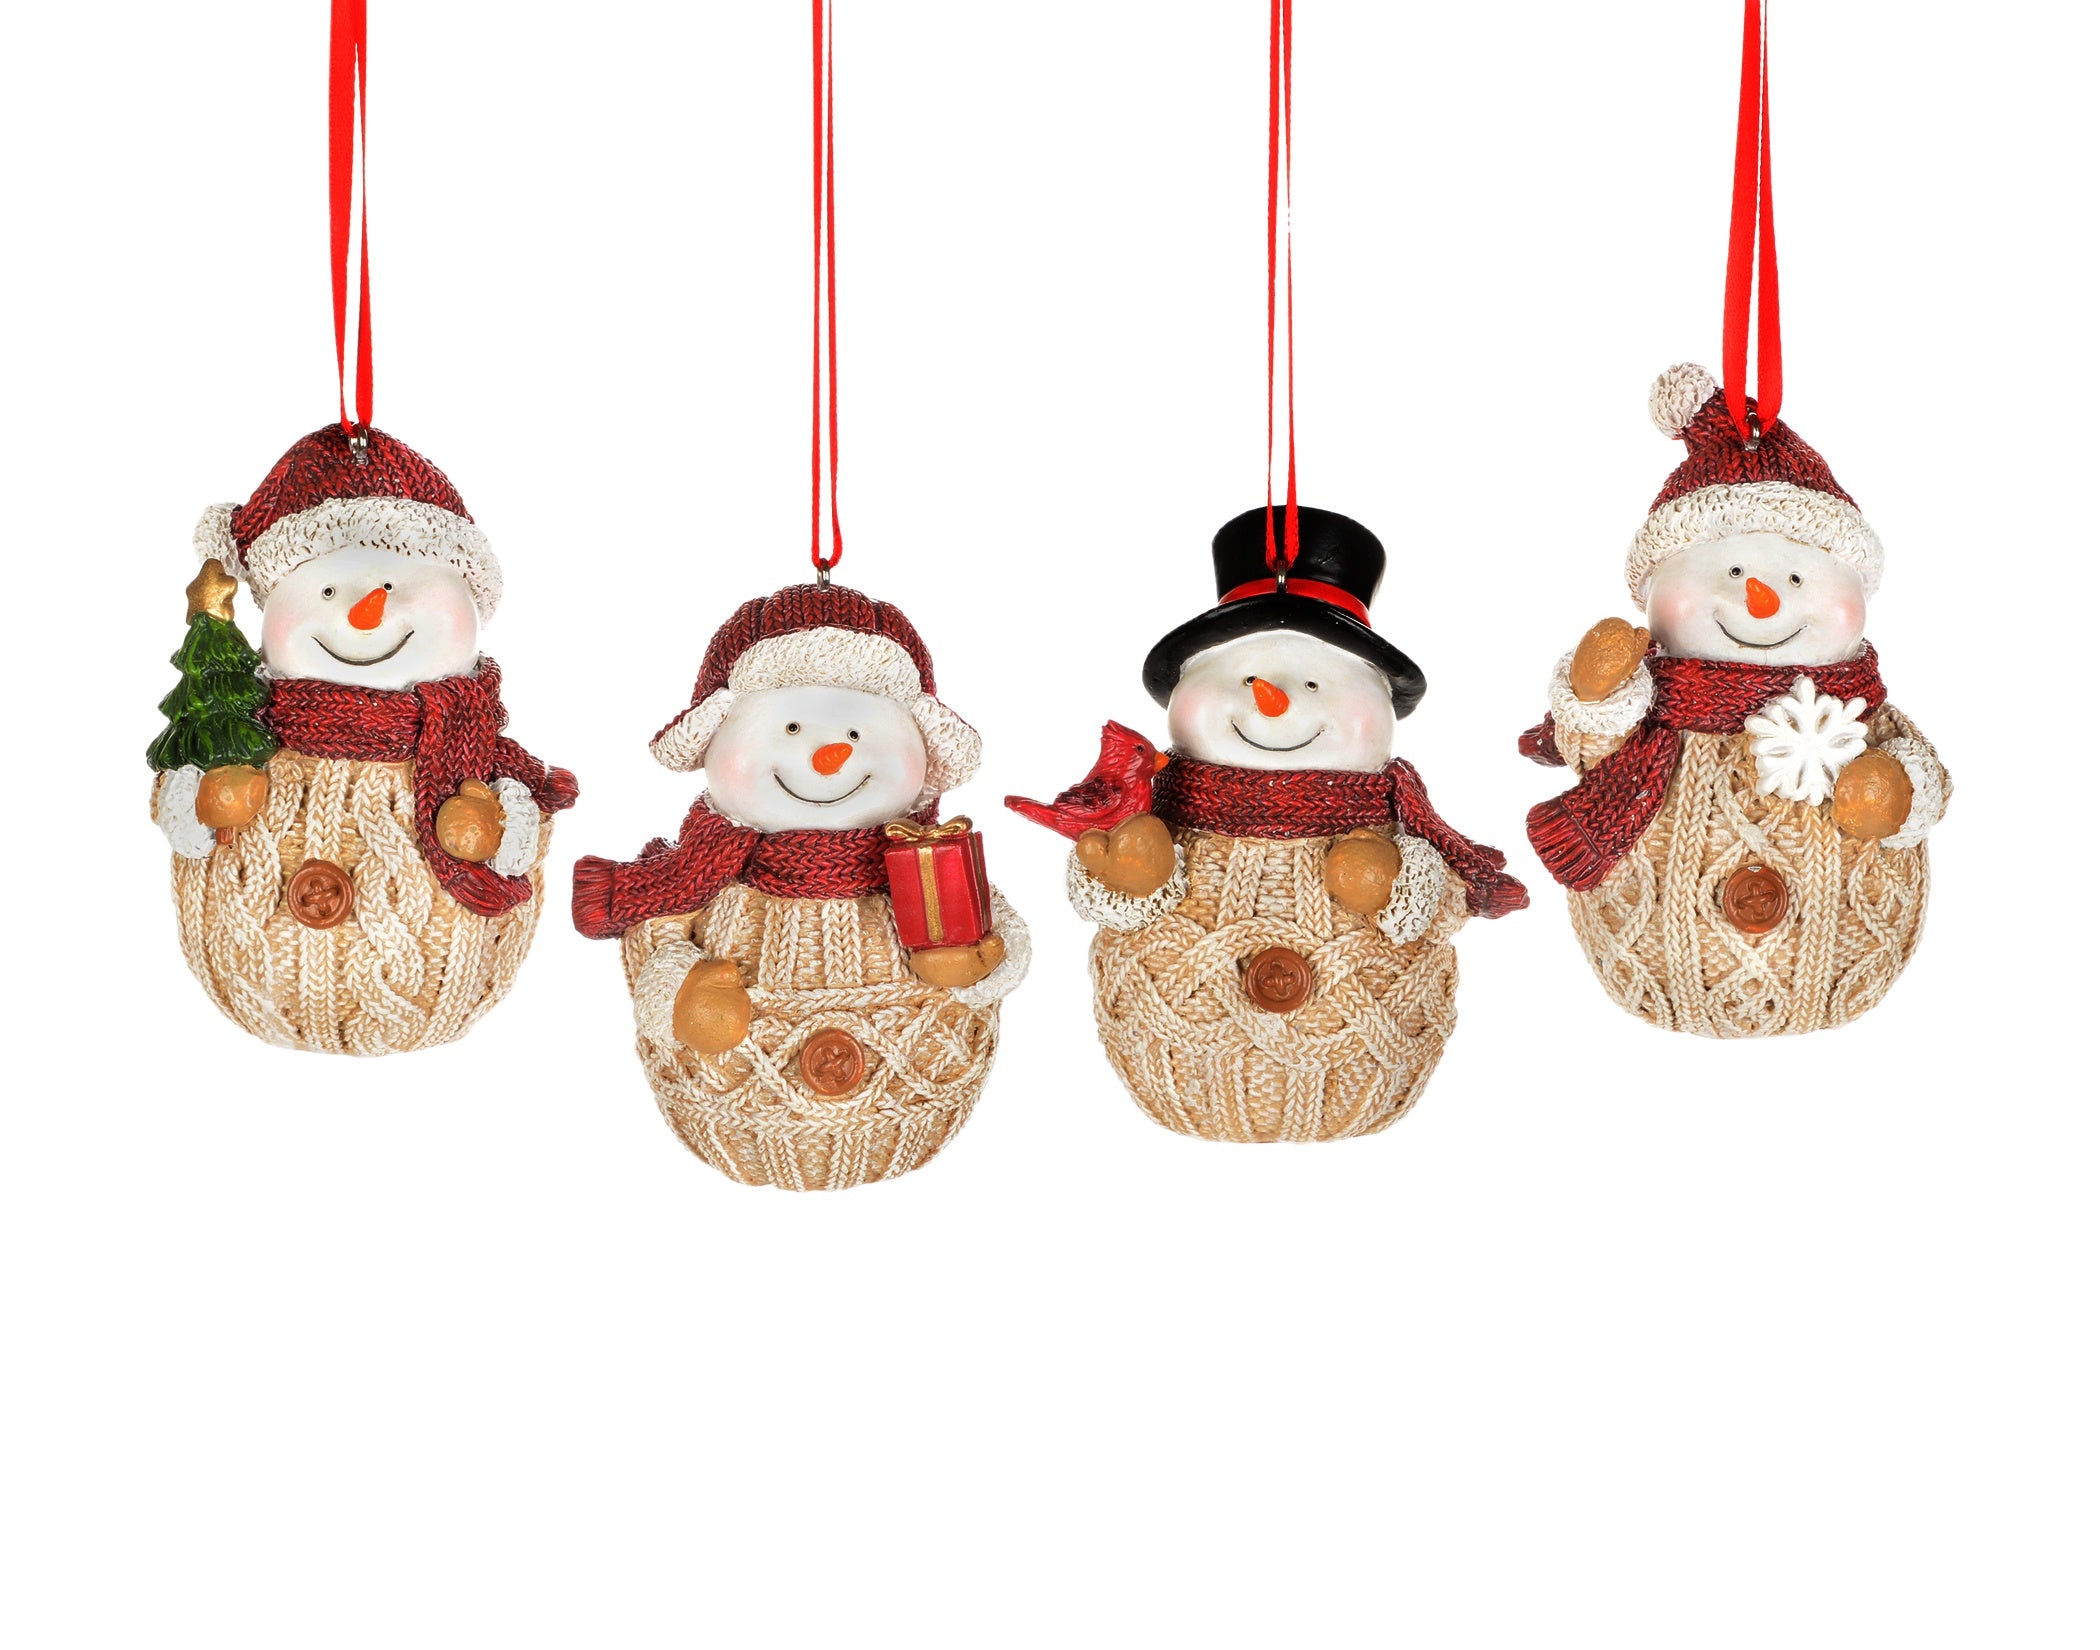 Snowman in Knitted Sweaters - Assorted